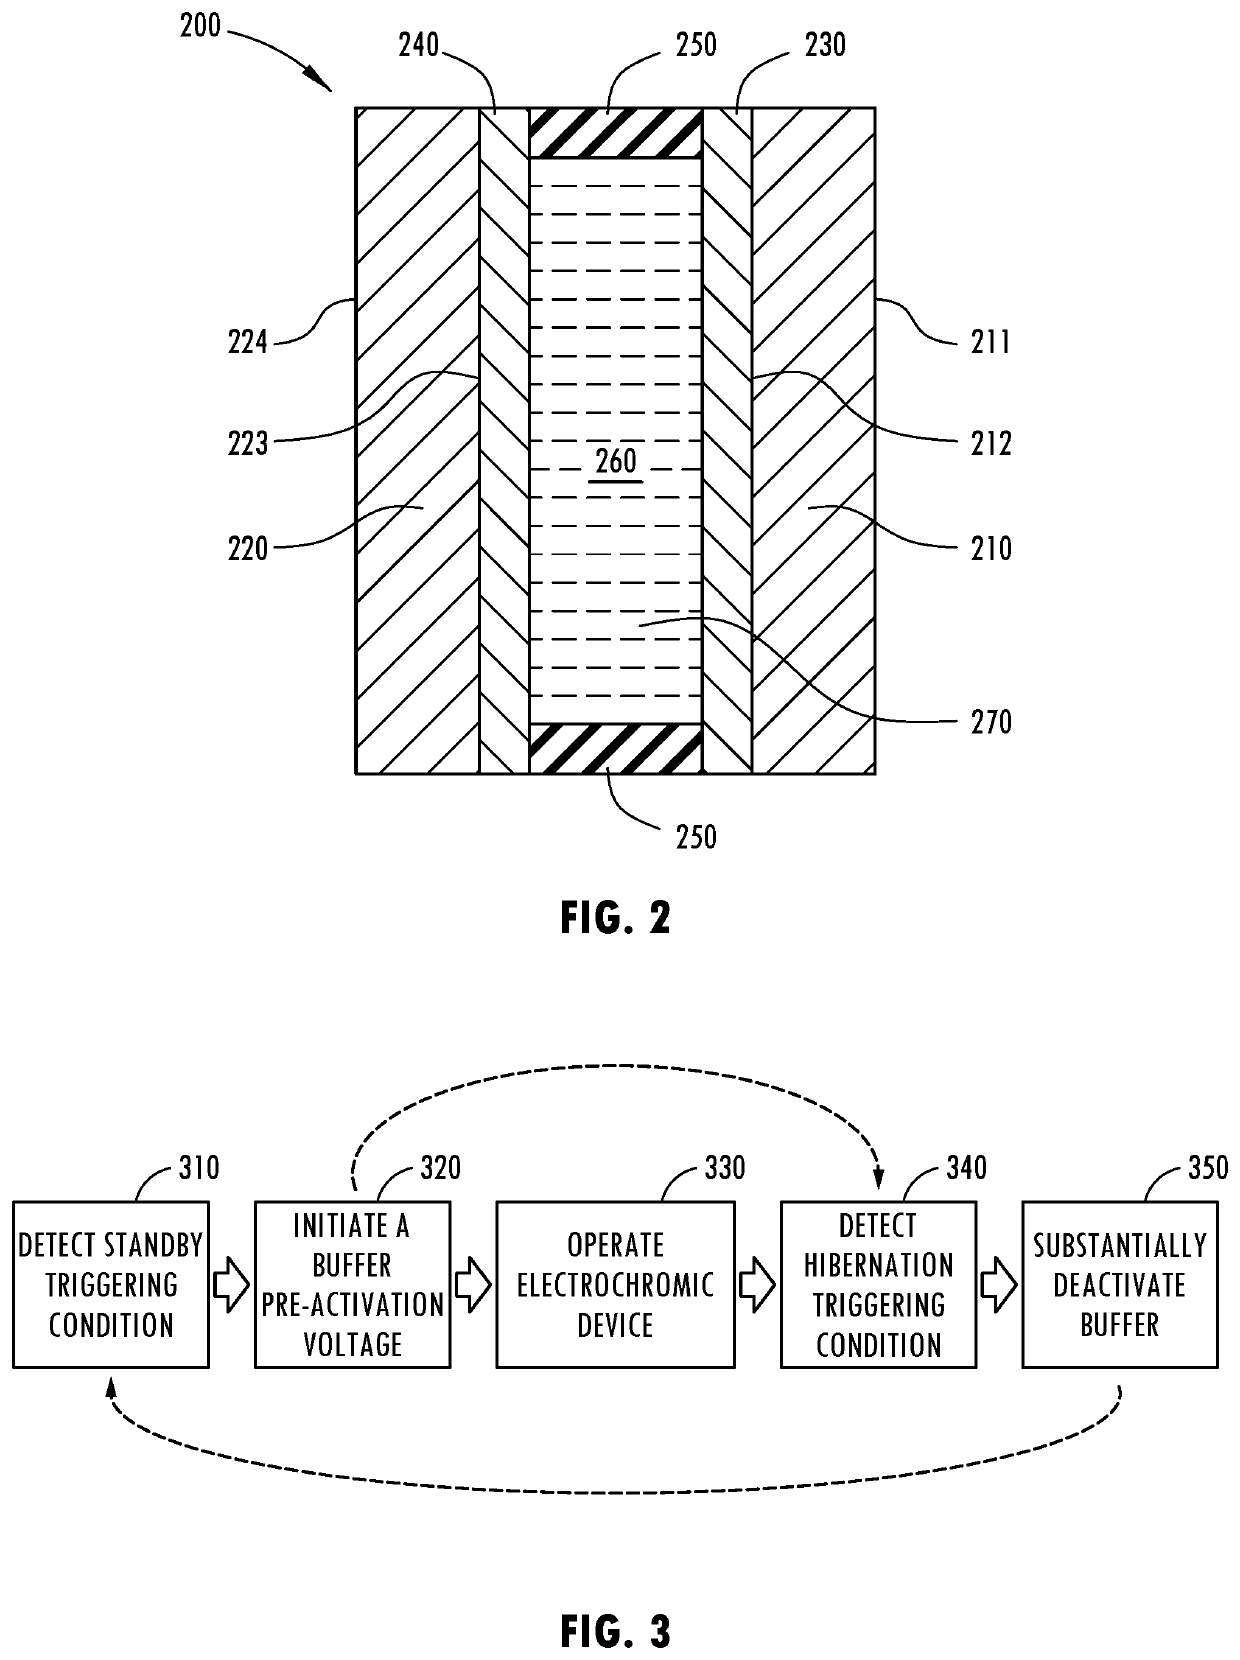 Buffer pre-activation for electrochromic device